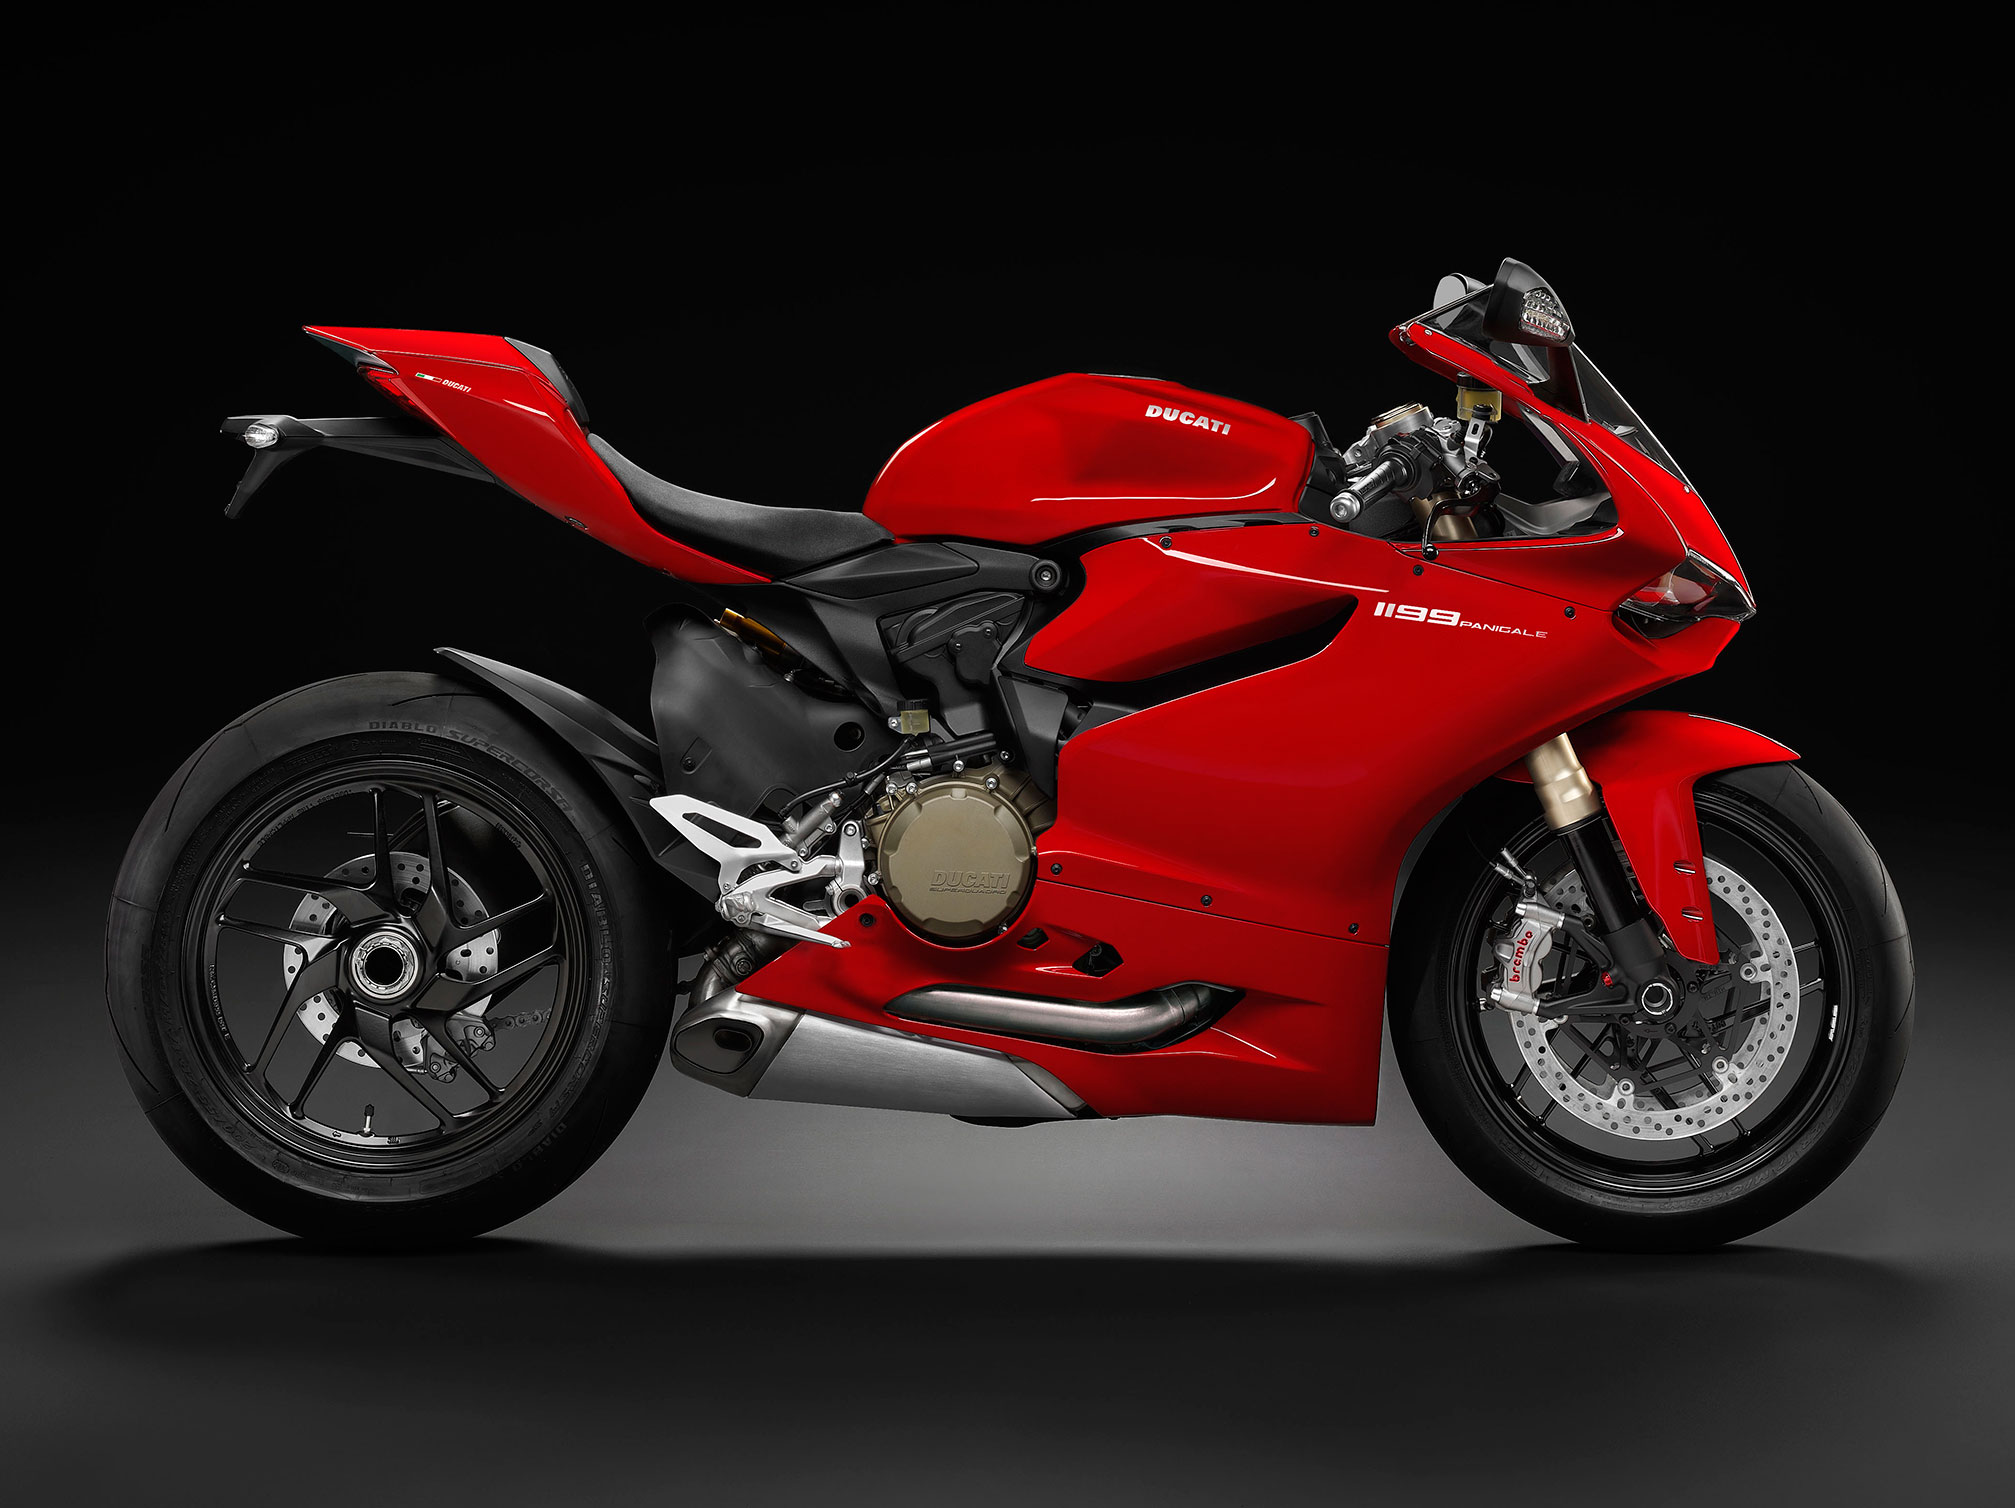 2015 Ducati Superbike 1199 Panigale Review